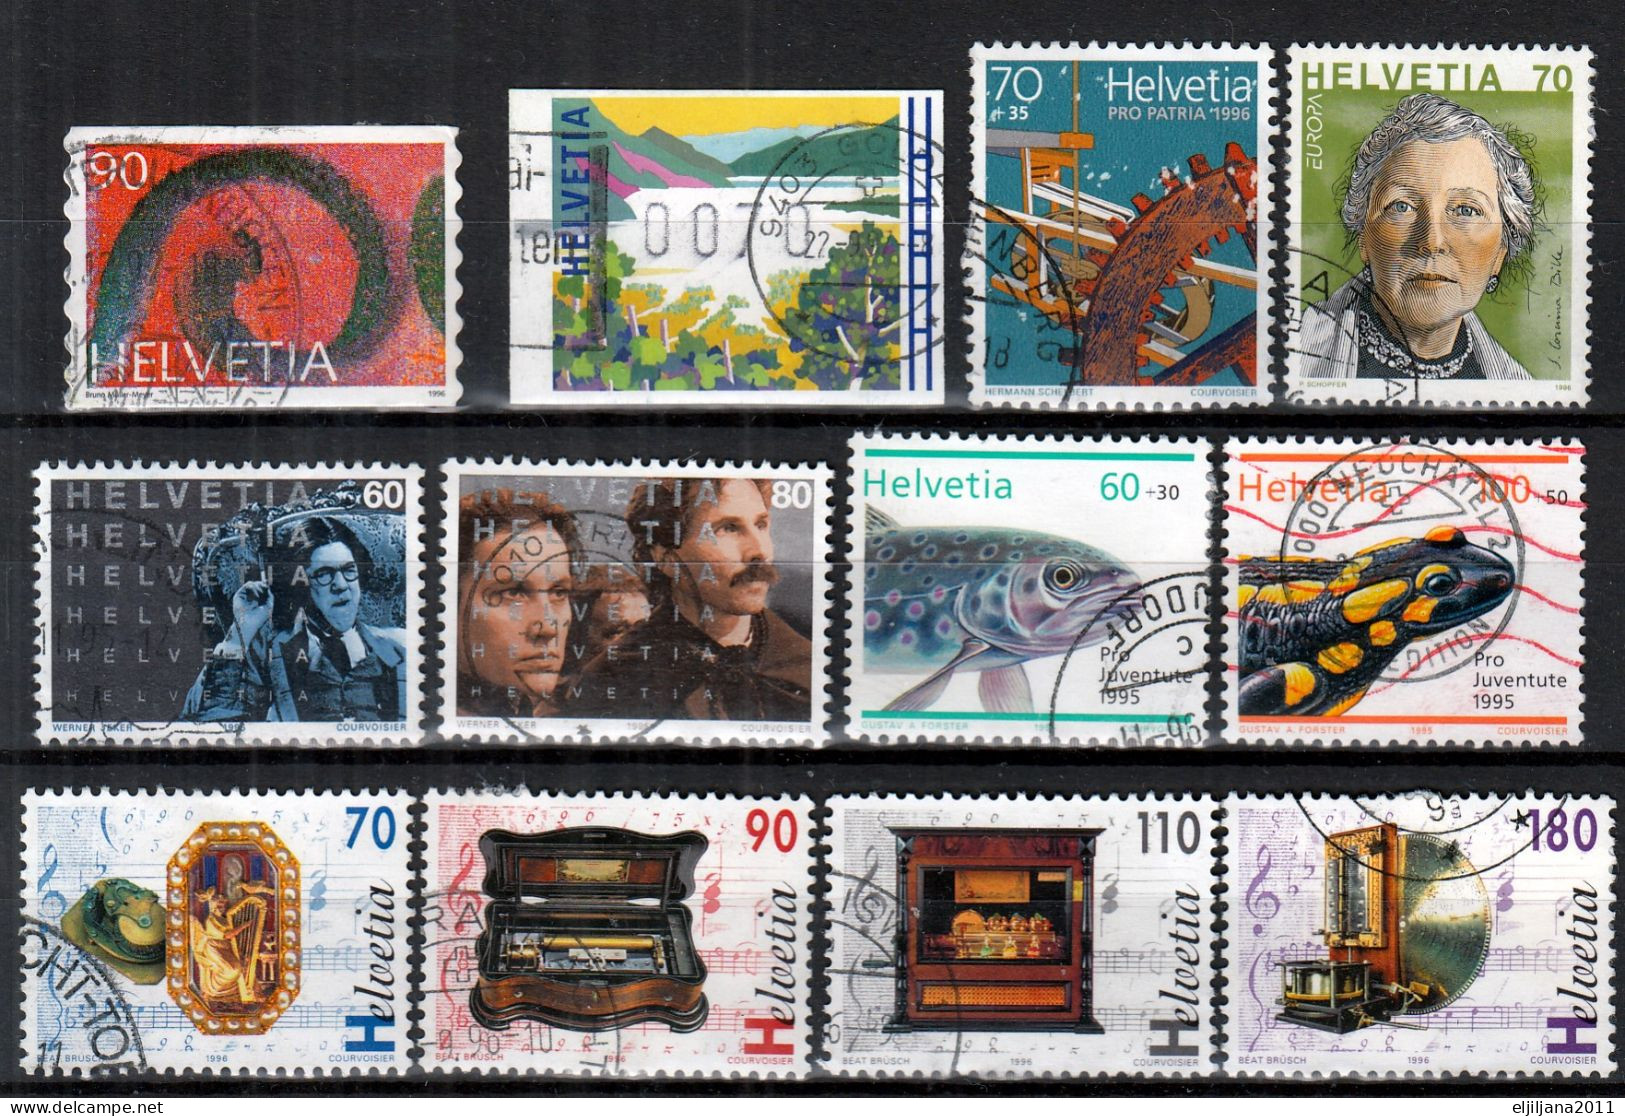 Switzerland / Helvetia / Schweiz / Suisse 1995 - 1996 ⁕ Nice Collection / Lot Of 27 Used Stamps - See All Scan - Used Stamps